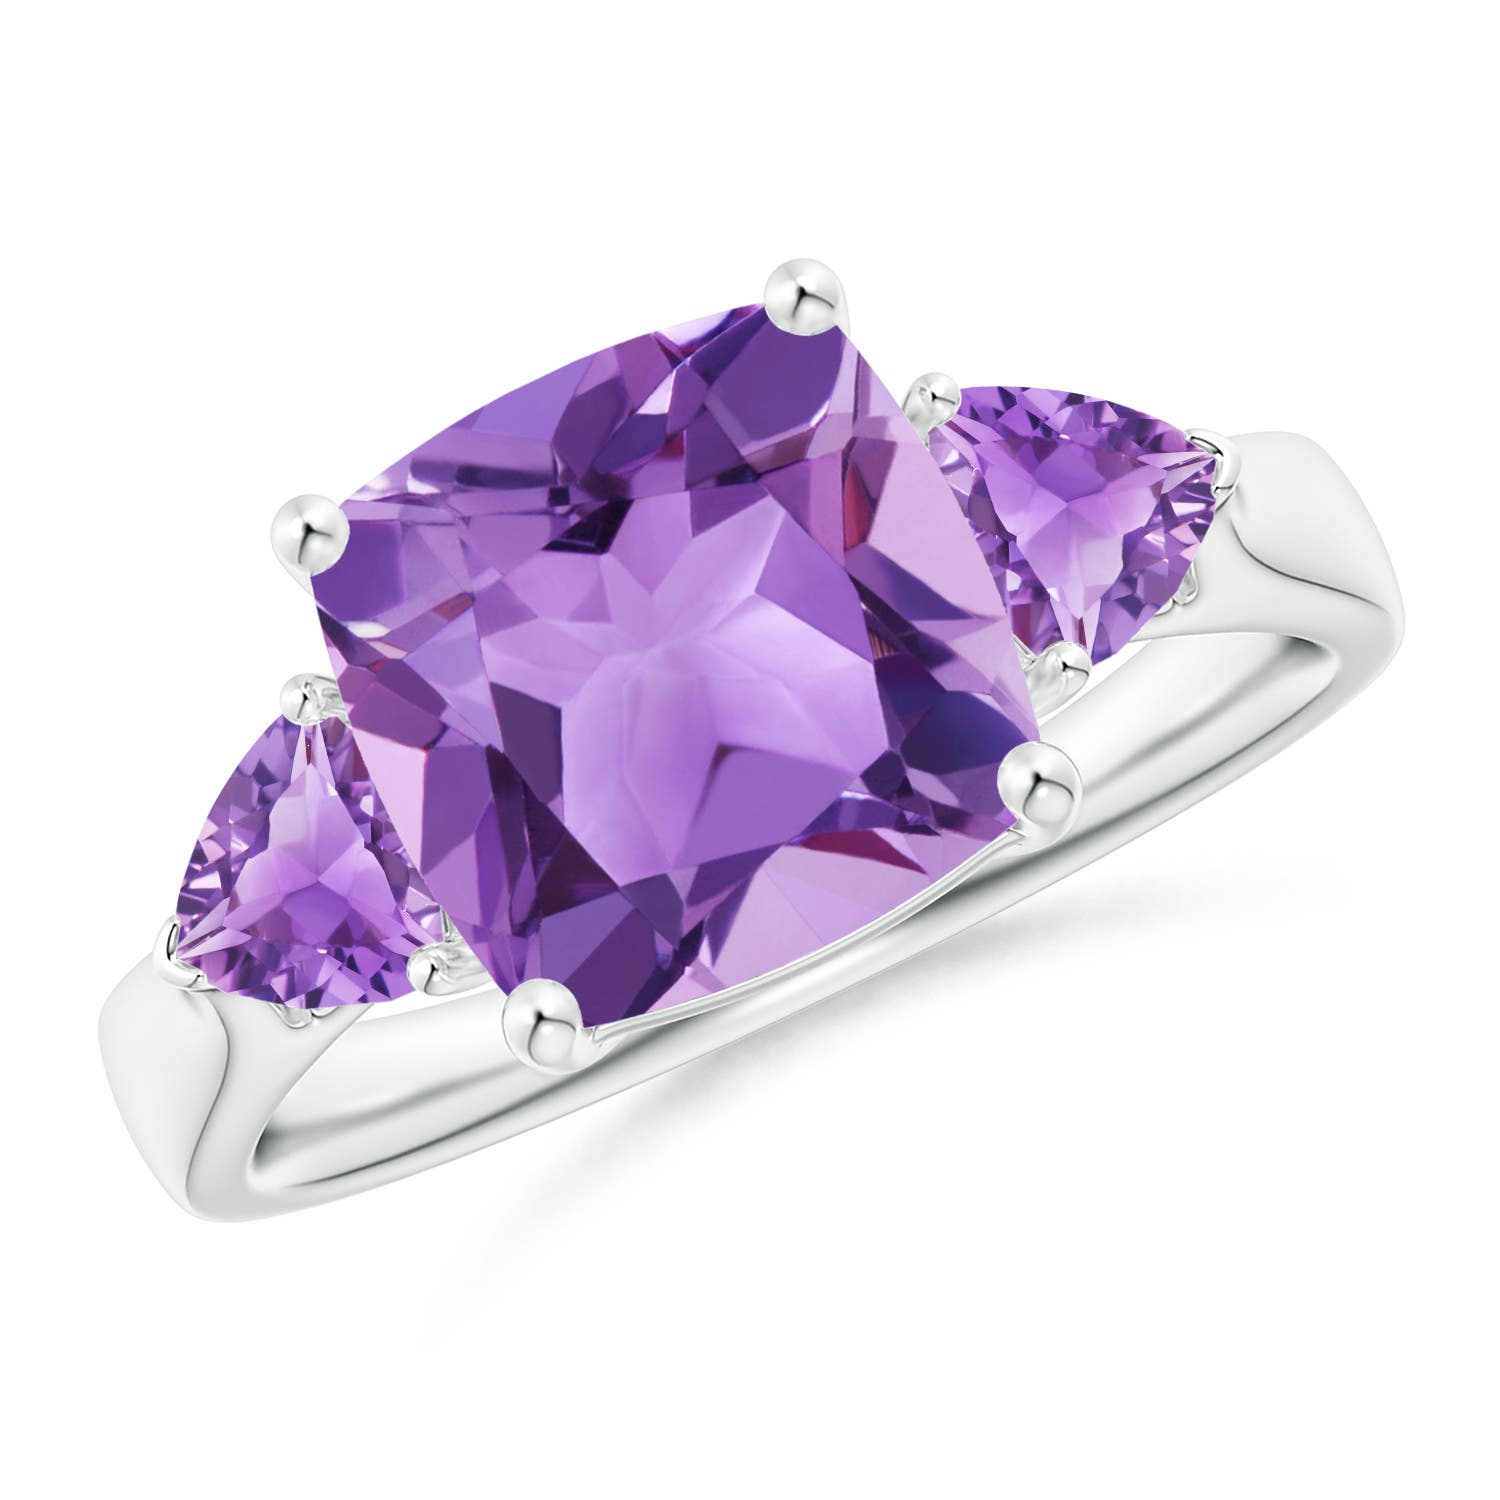 A - Amethyst / 3.9 CT / 14 KT White Gold